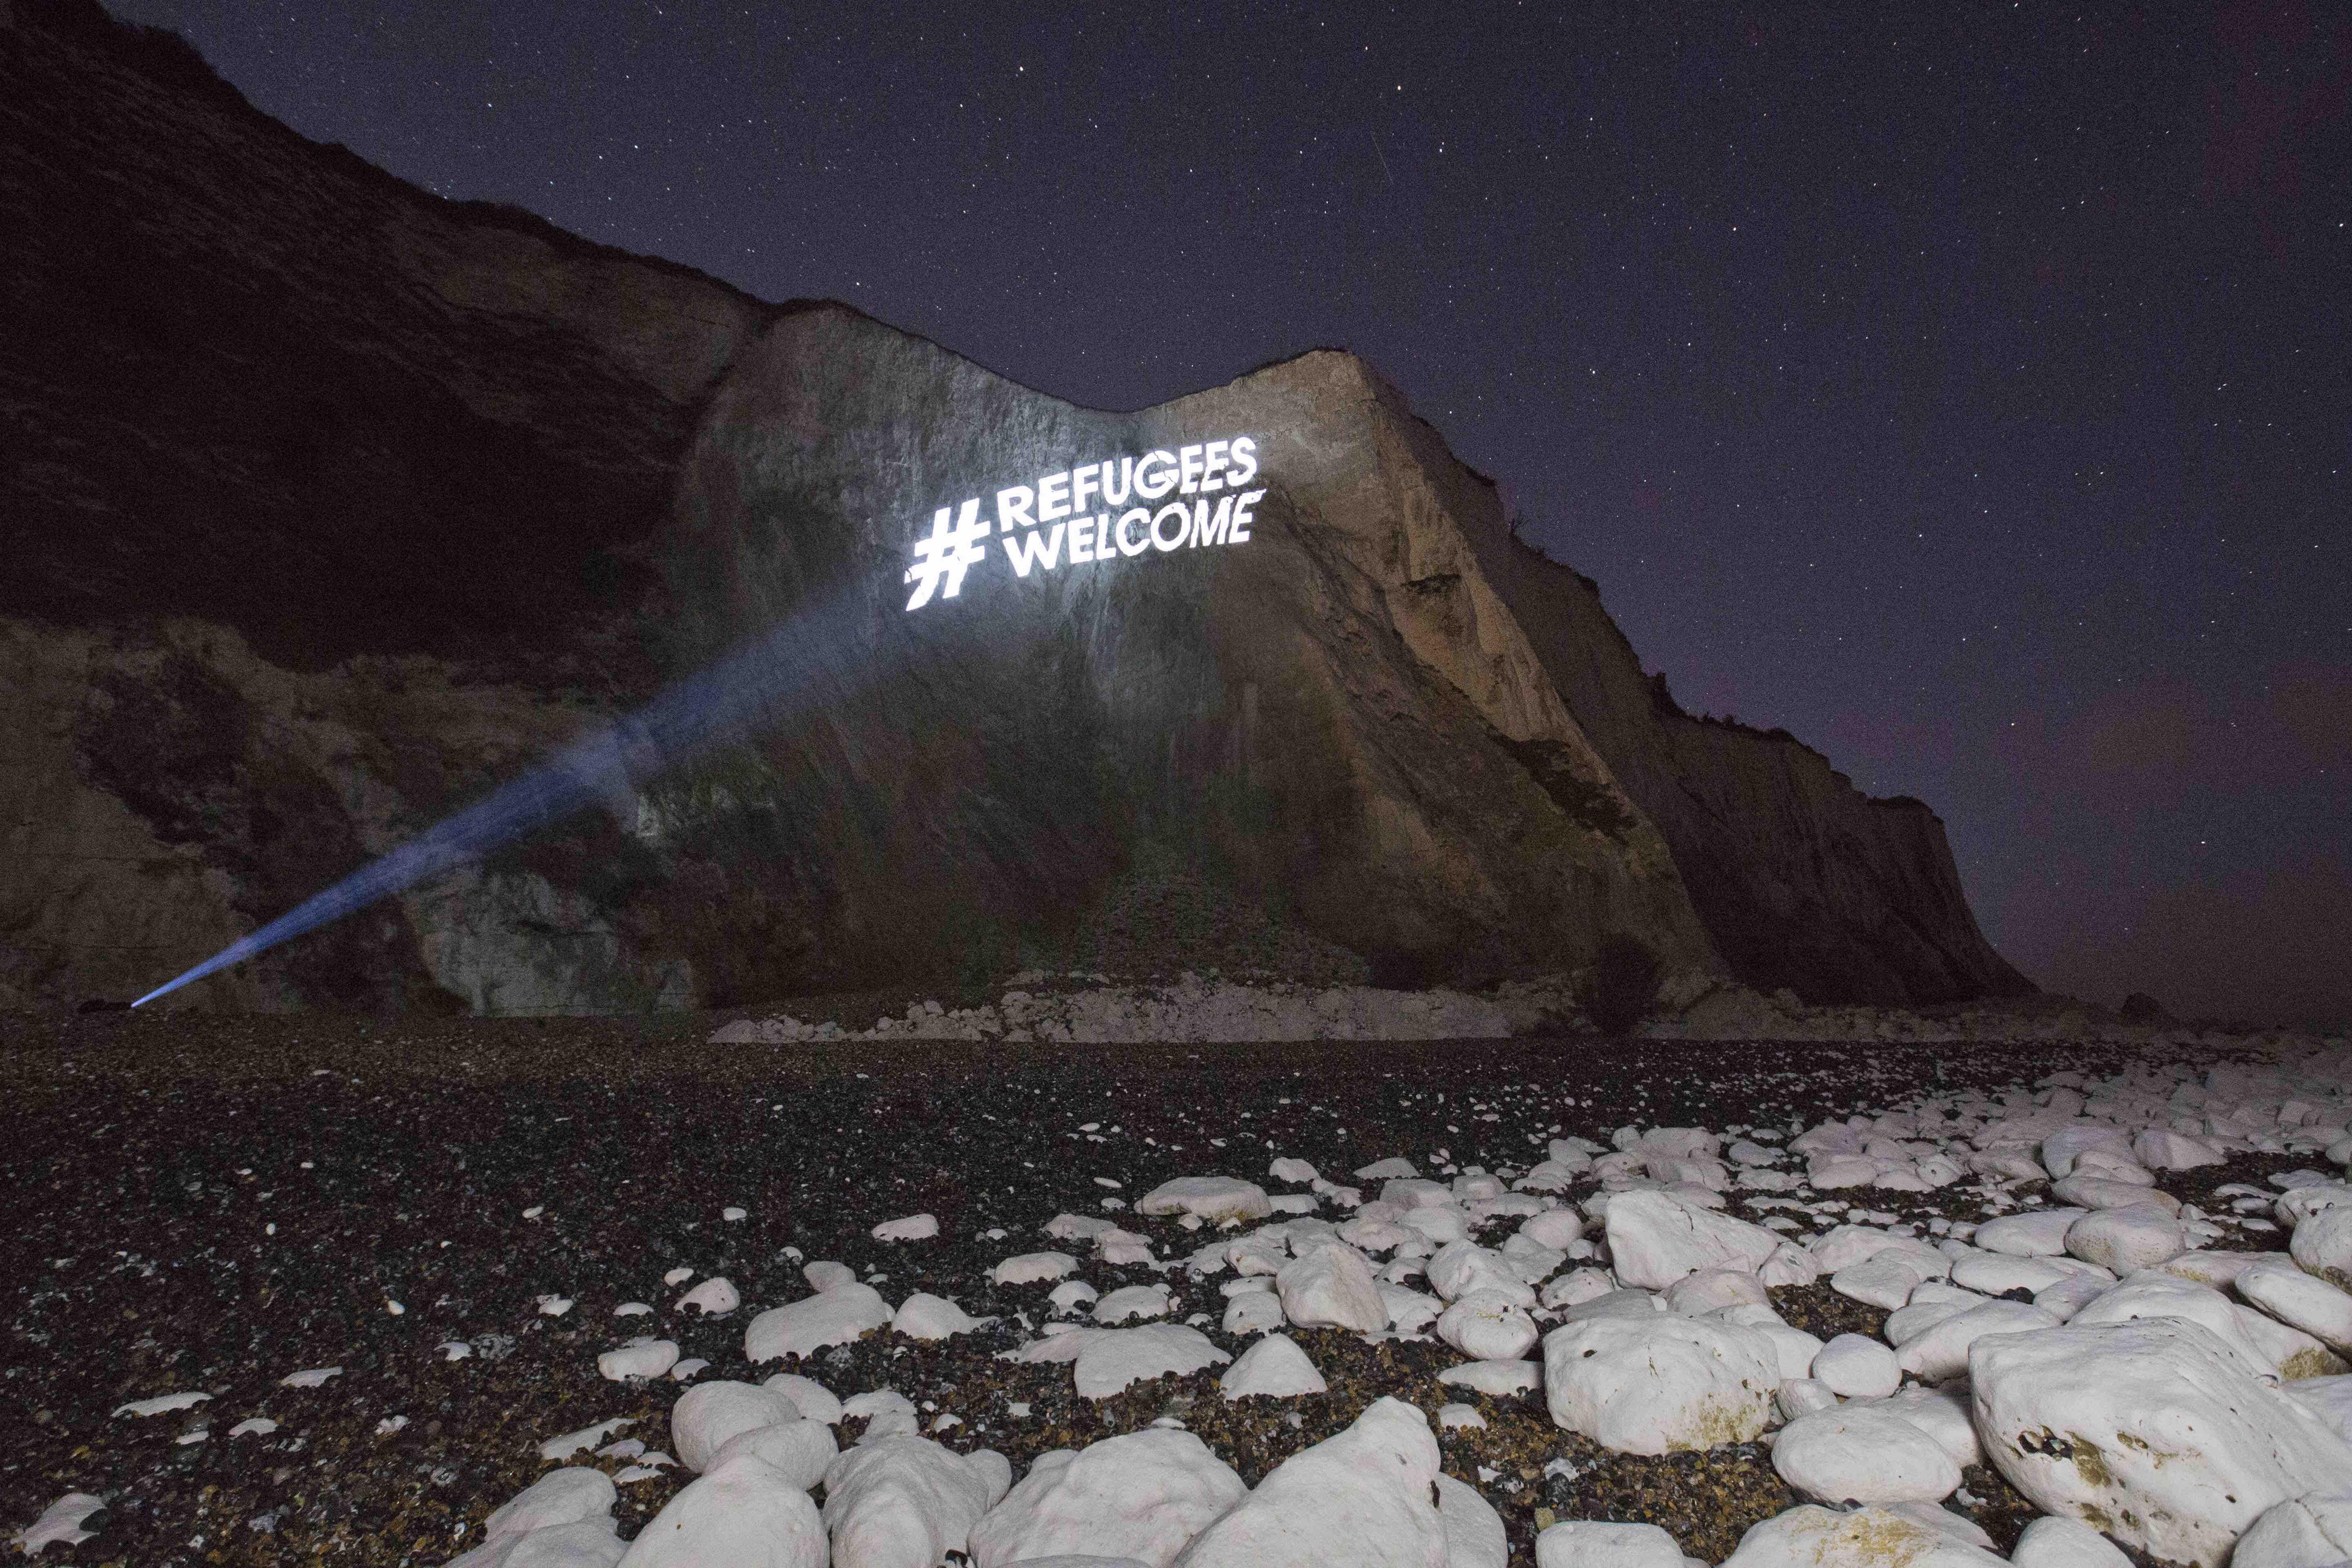 #RefugeesWelcome on the white cliffs of dover